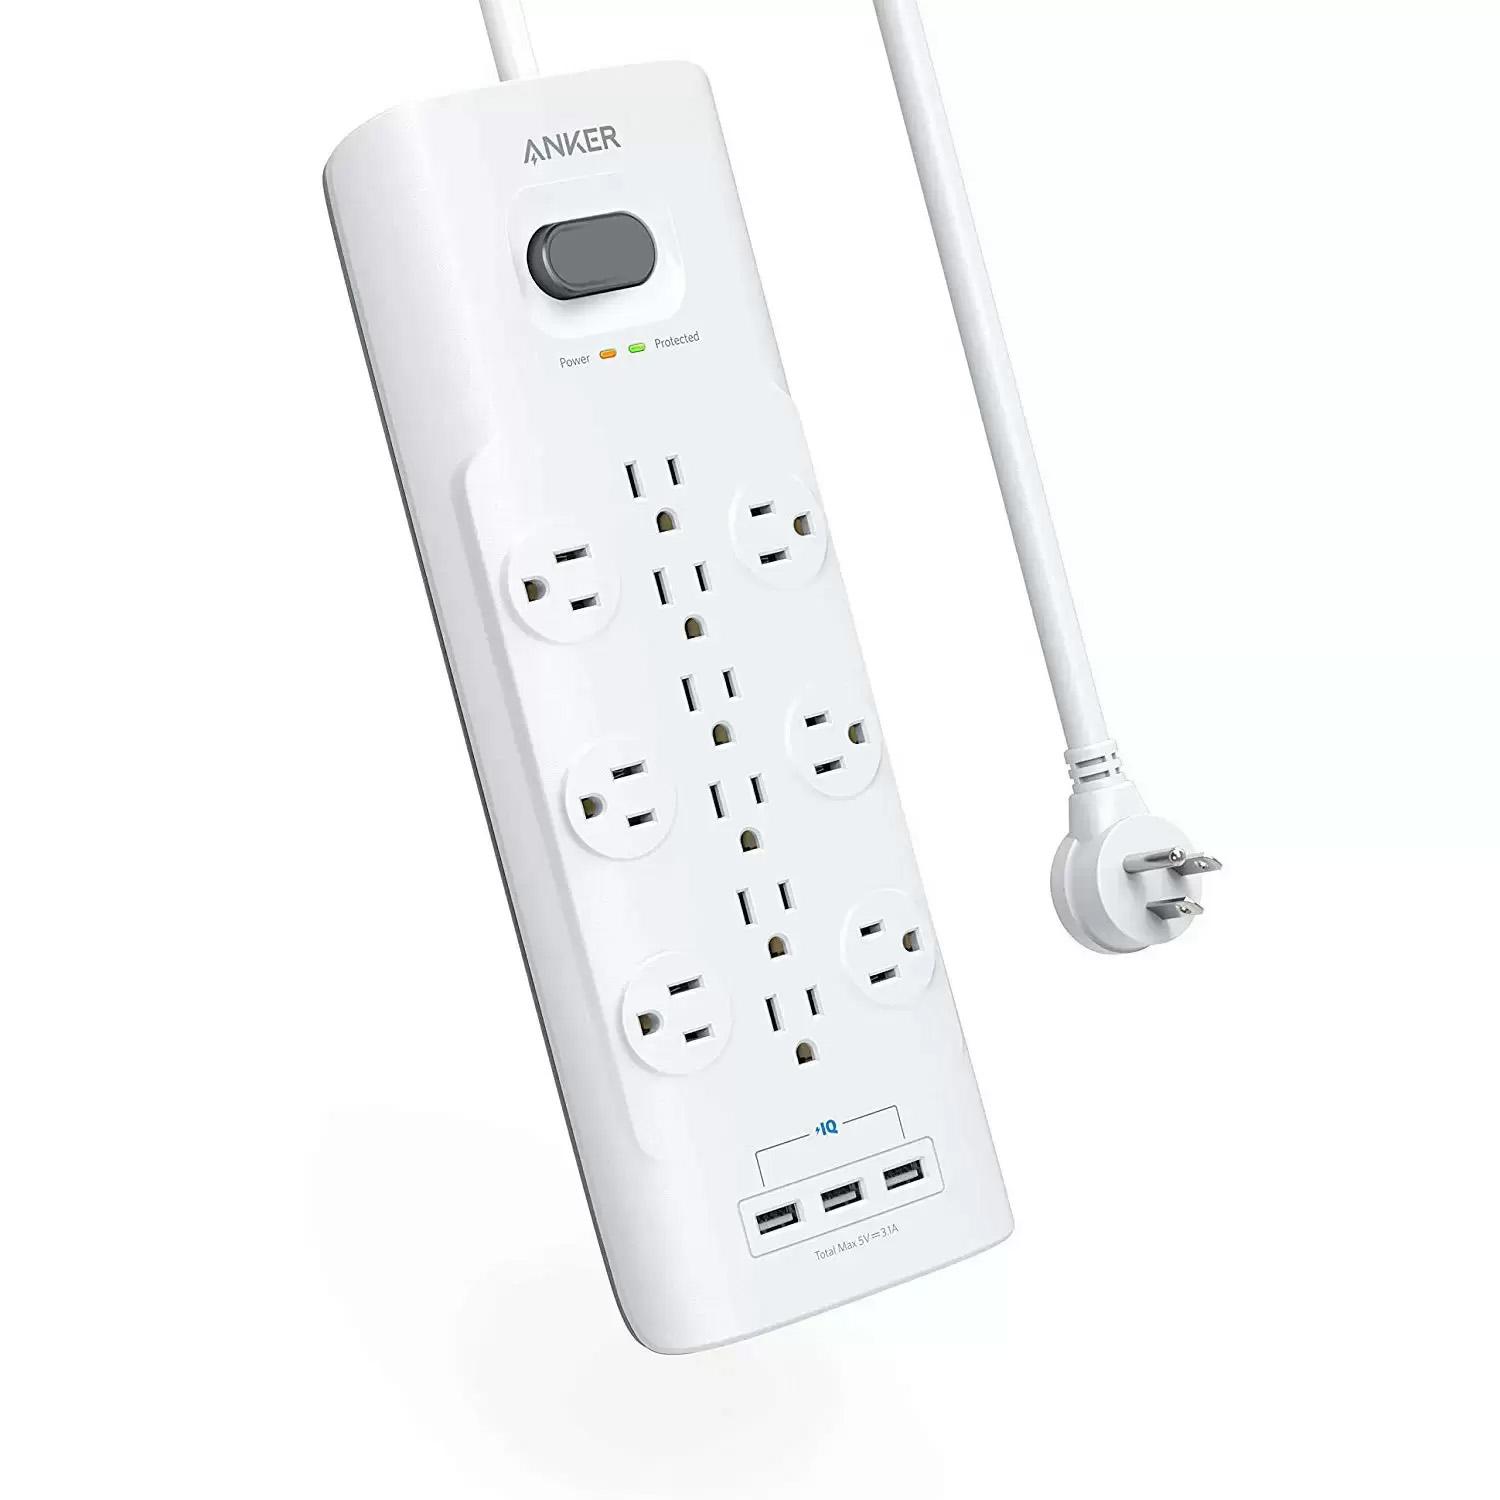 Anker 12-Outlet 3 USB Power Strip Surge Protector for $22.99